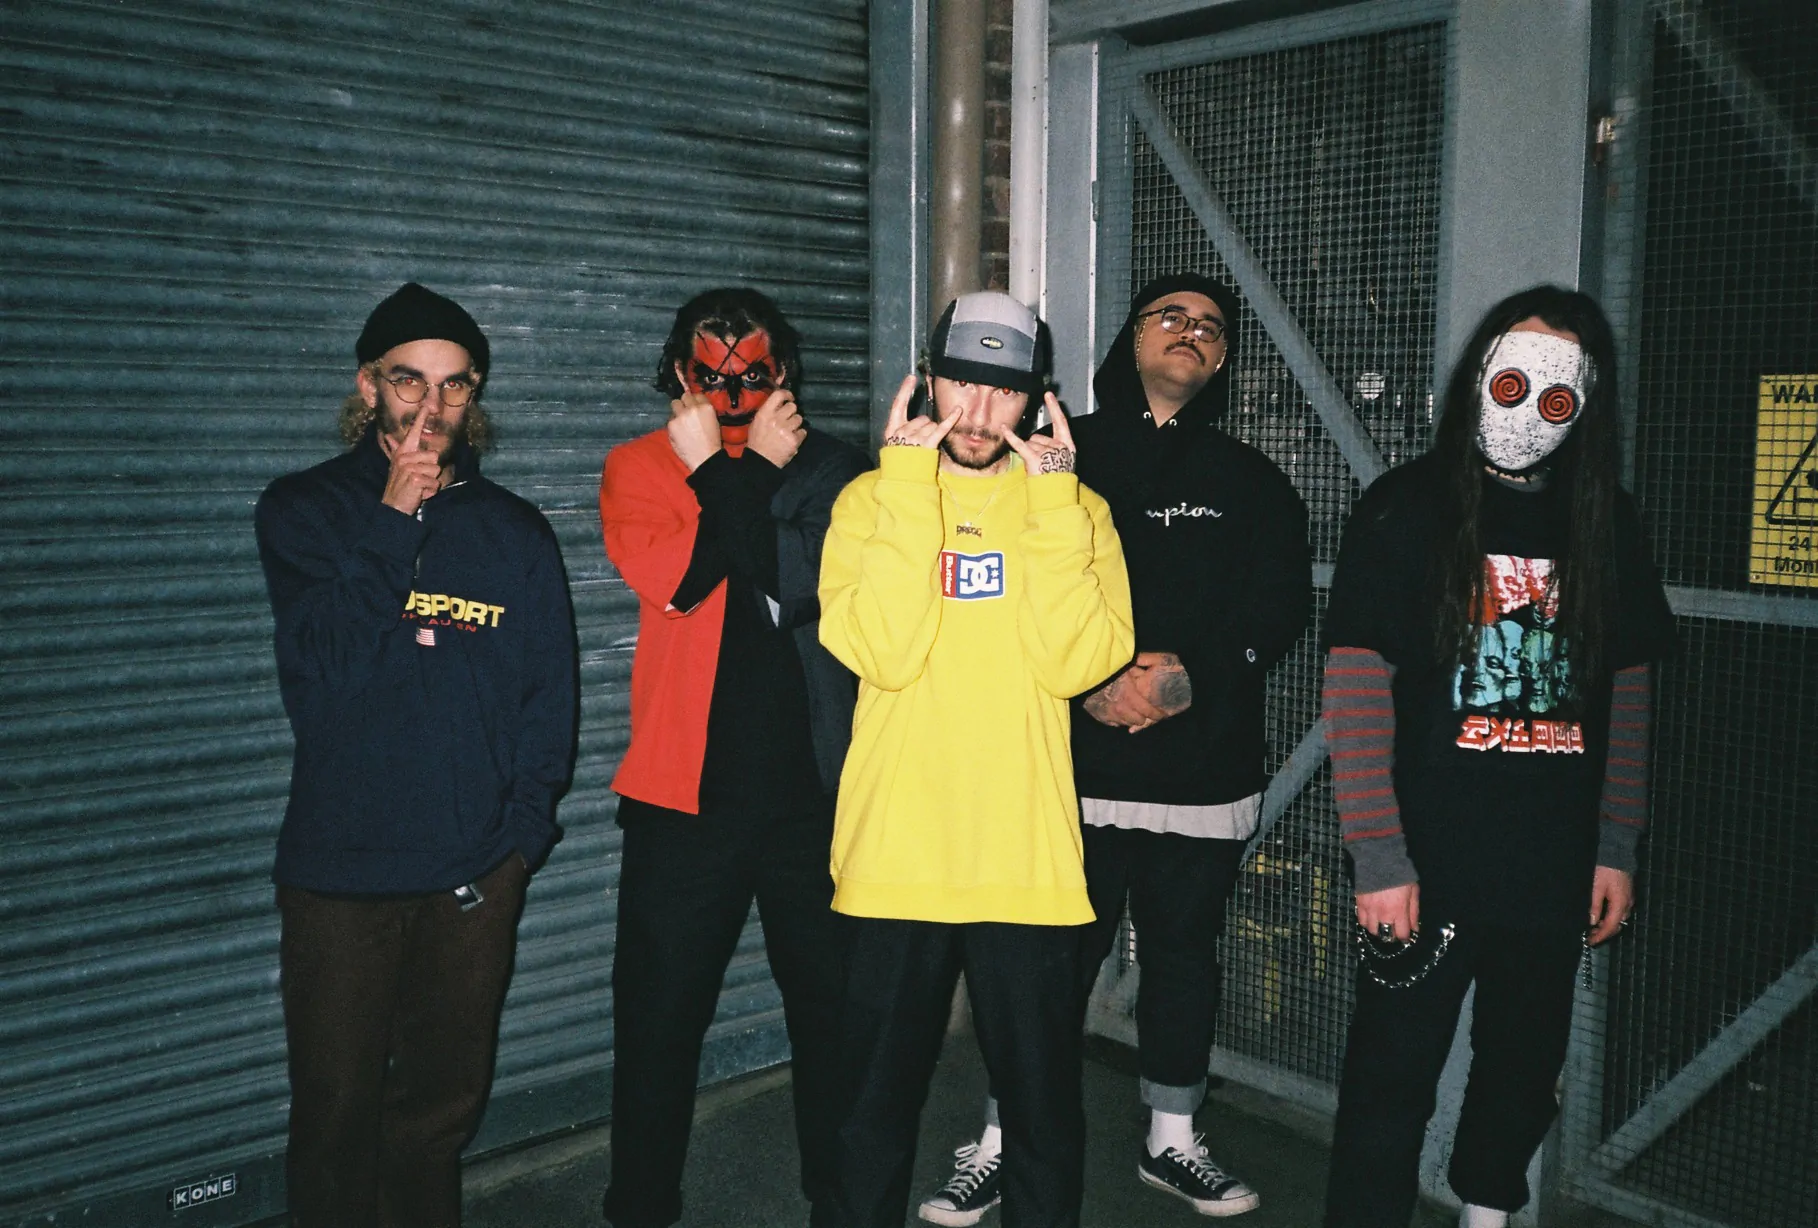 Melbourne based anomalistic collective DREGG share new track ‘I’m Done’ – Watch video